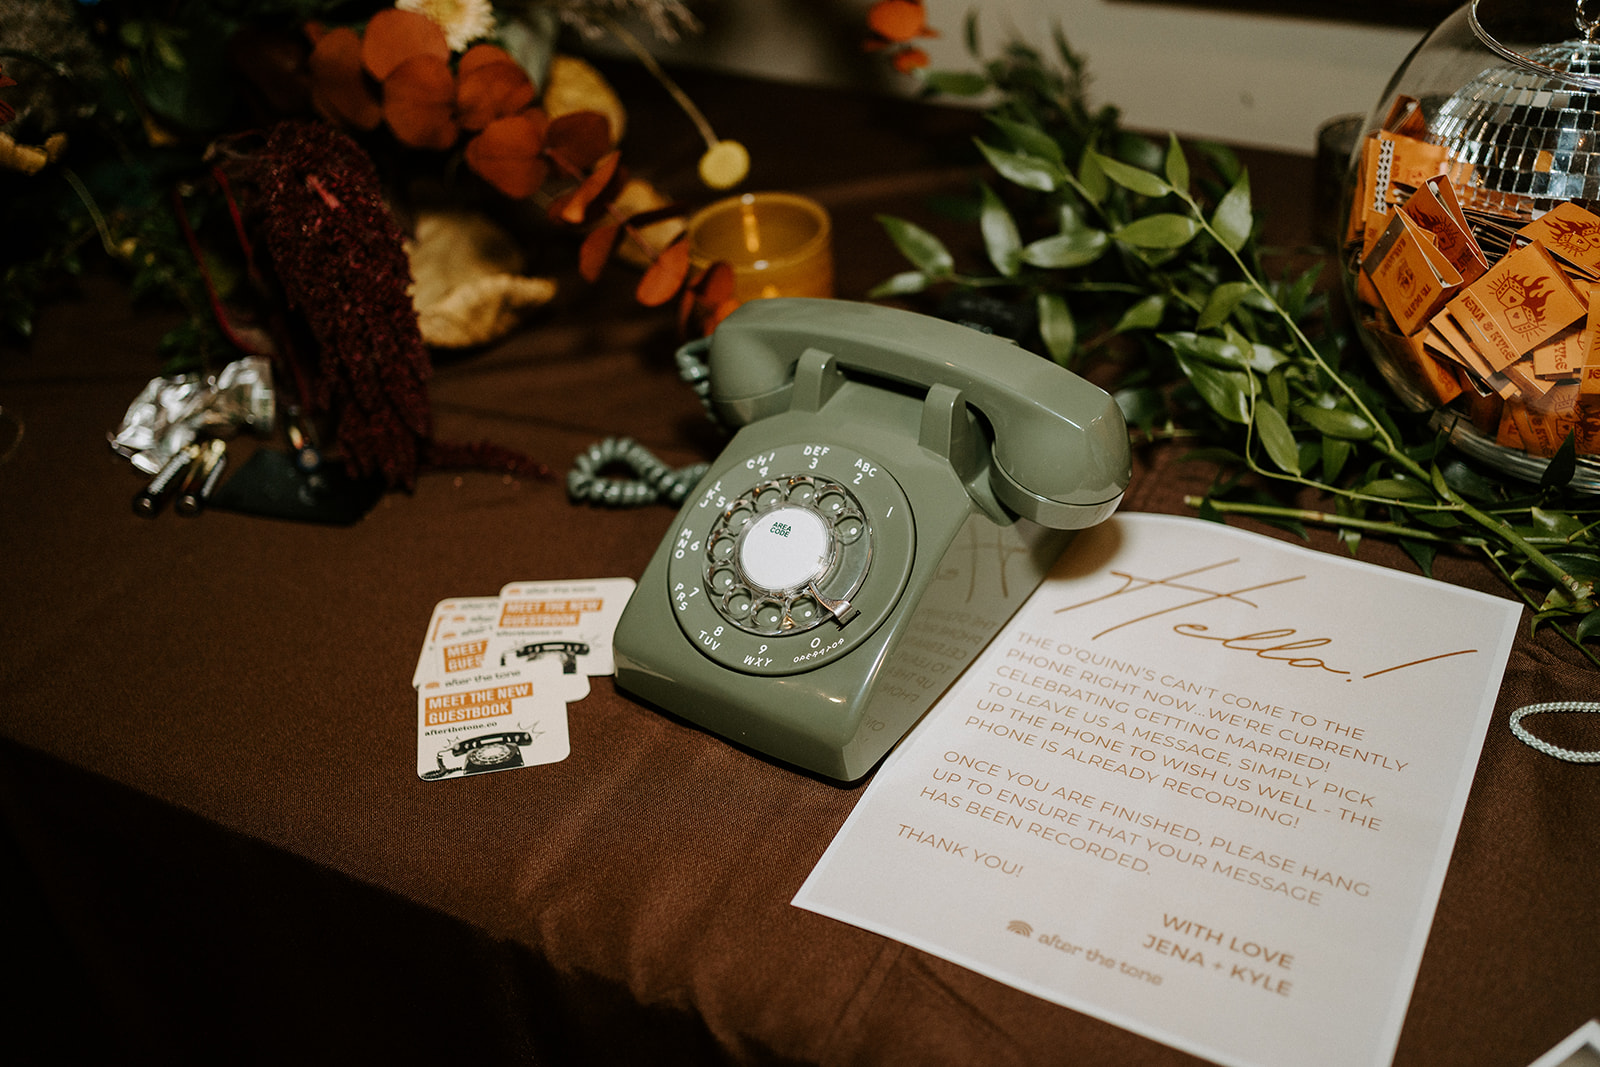 A rotary phone on the table.